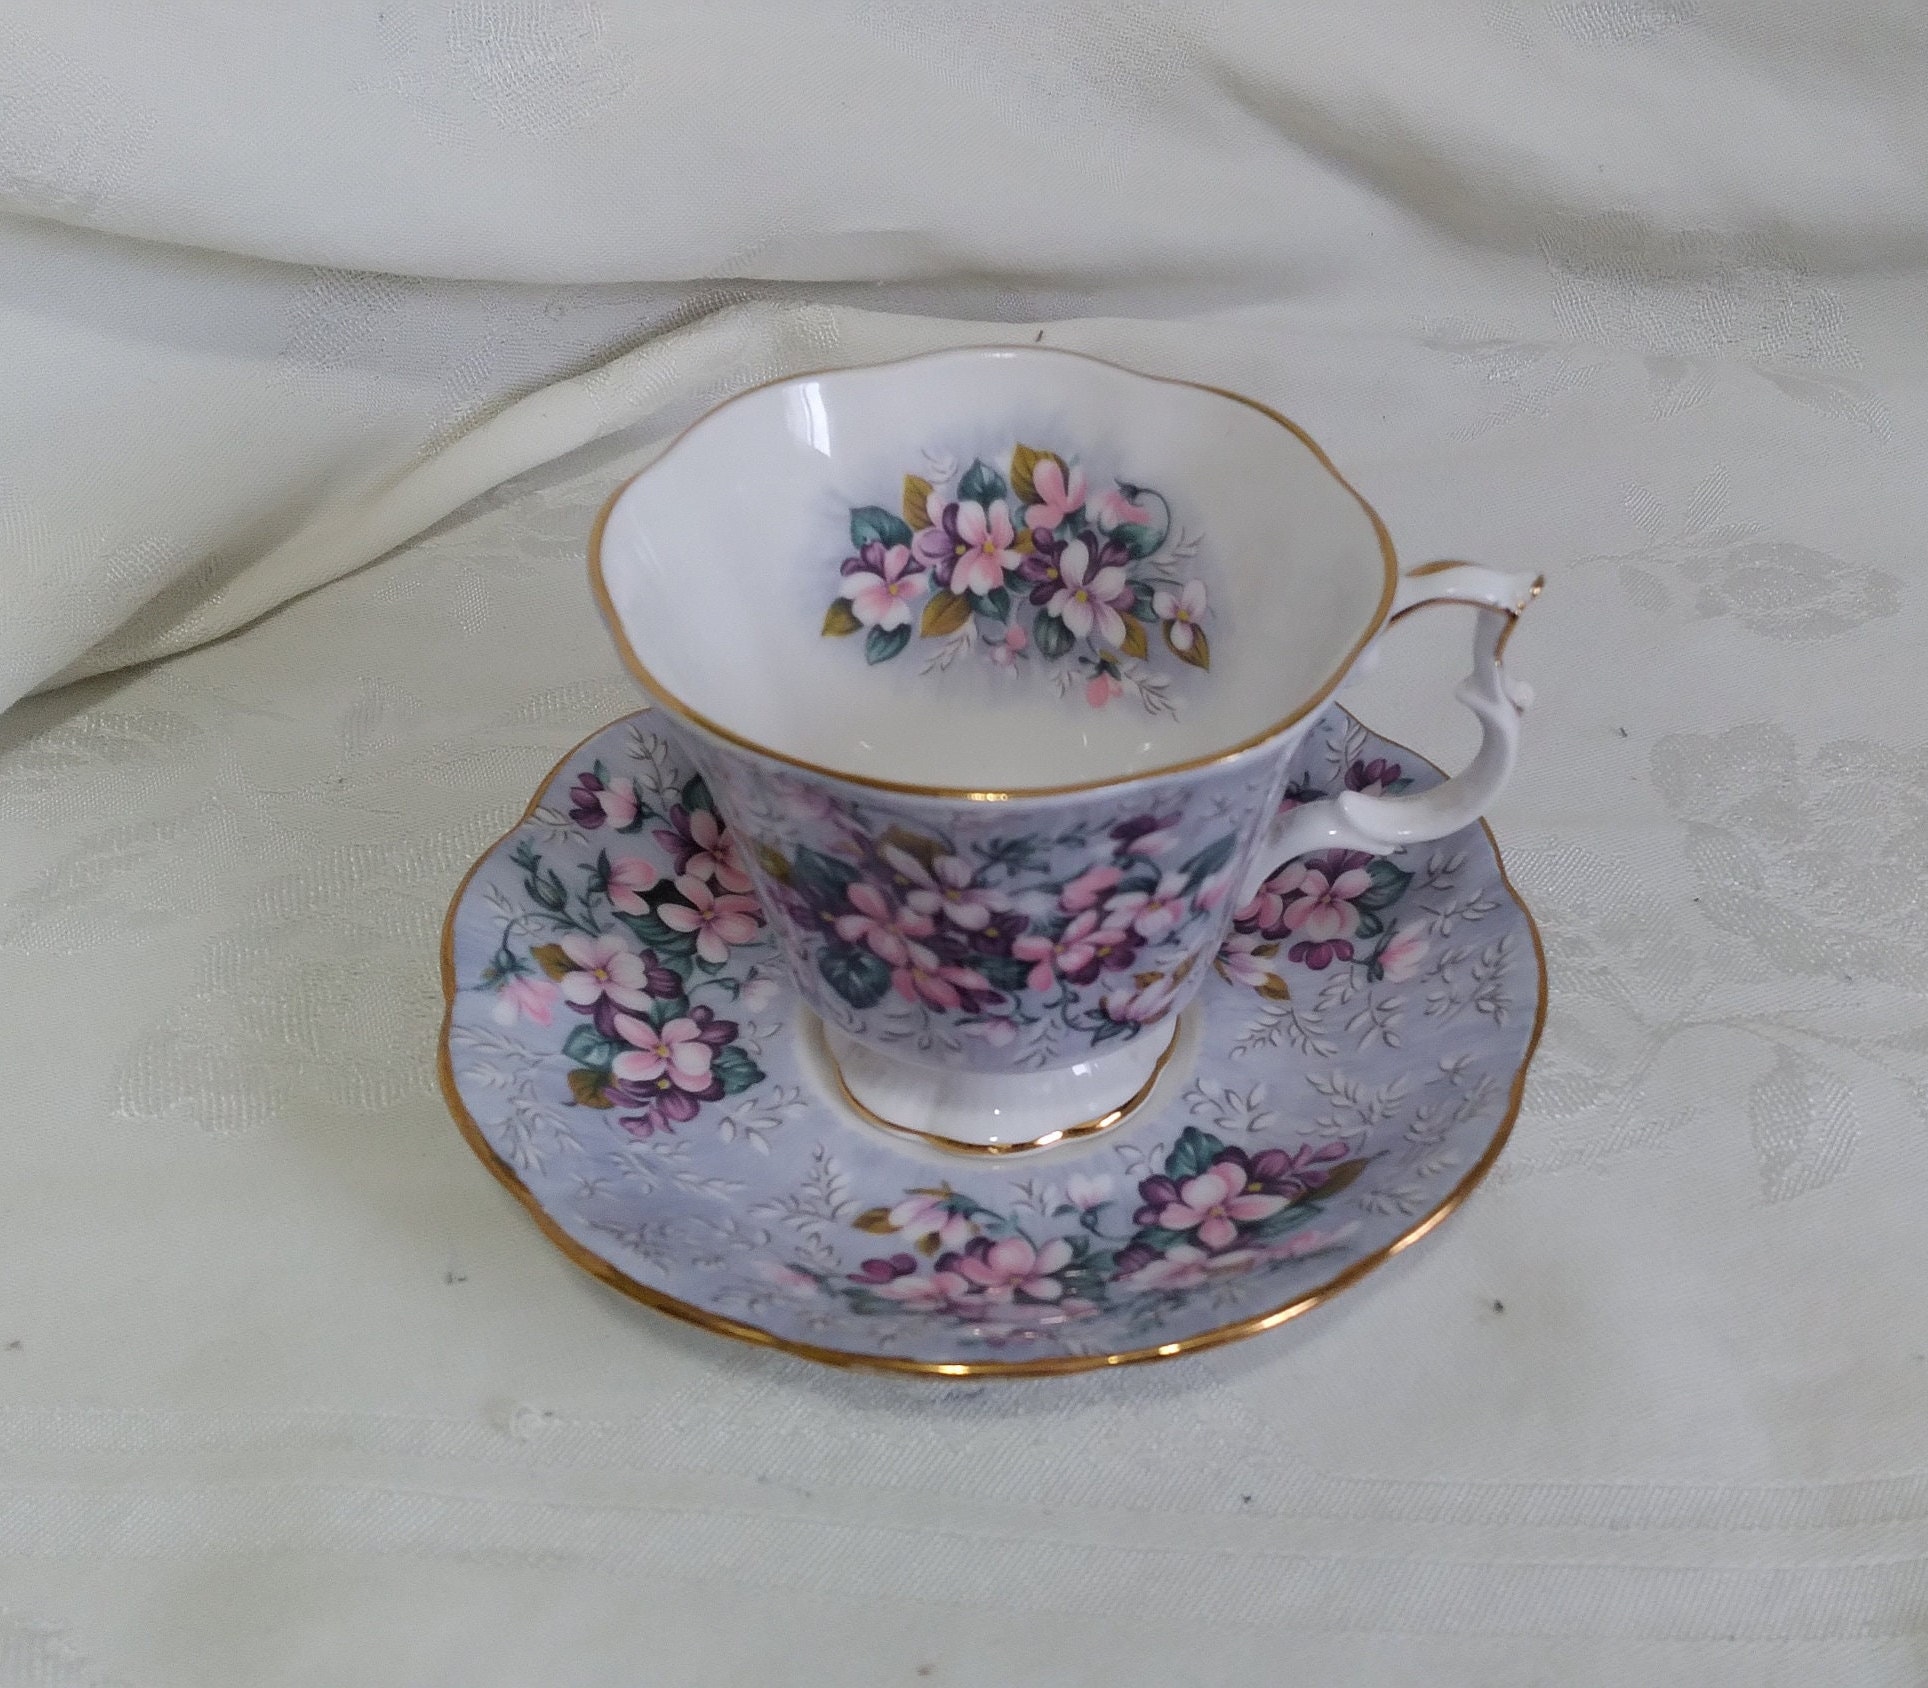 Vintage Tea Cup And Saucer Set - Ceramic - Gray from Apollo Box